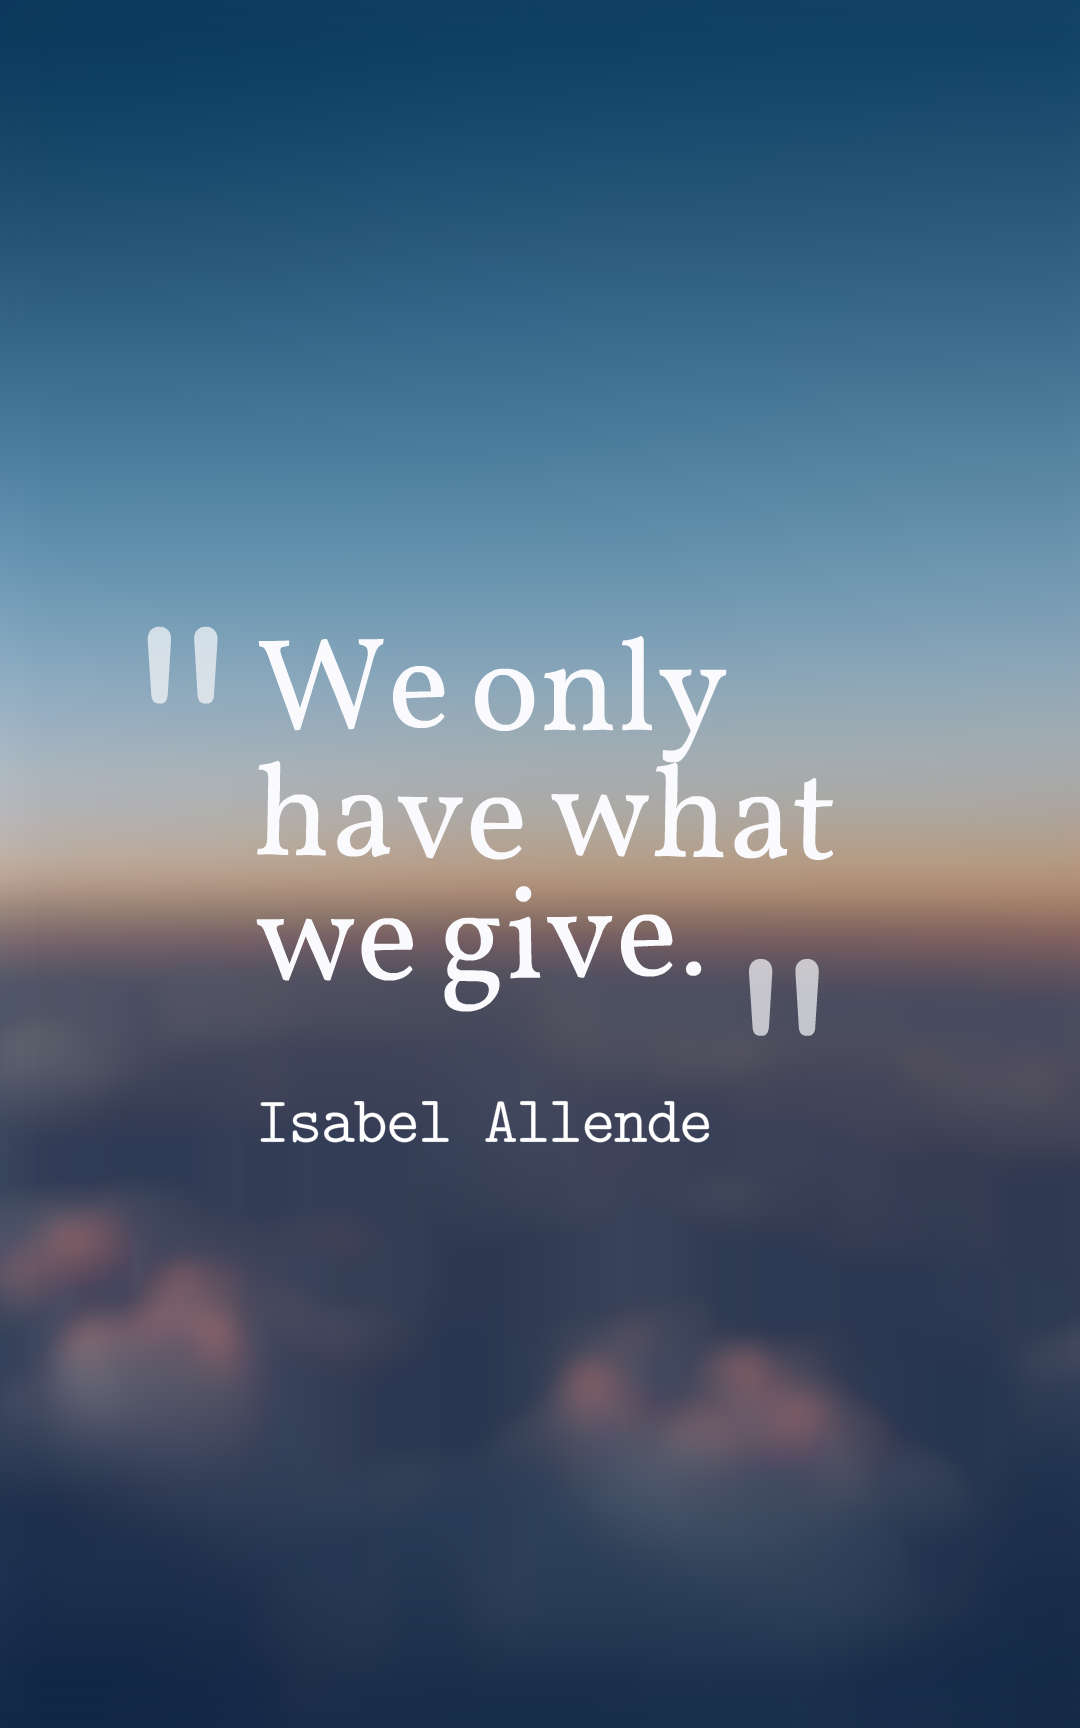 We only have what we give.